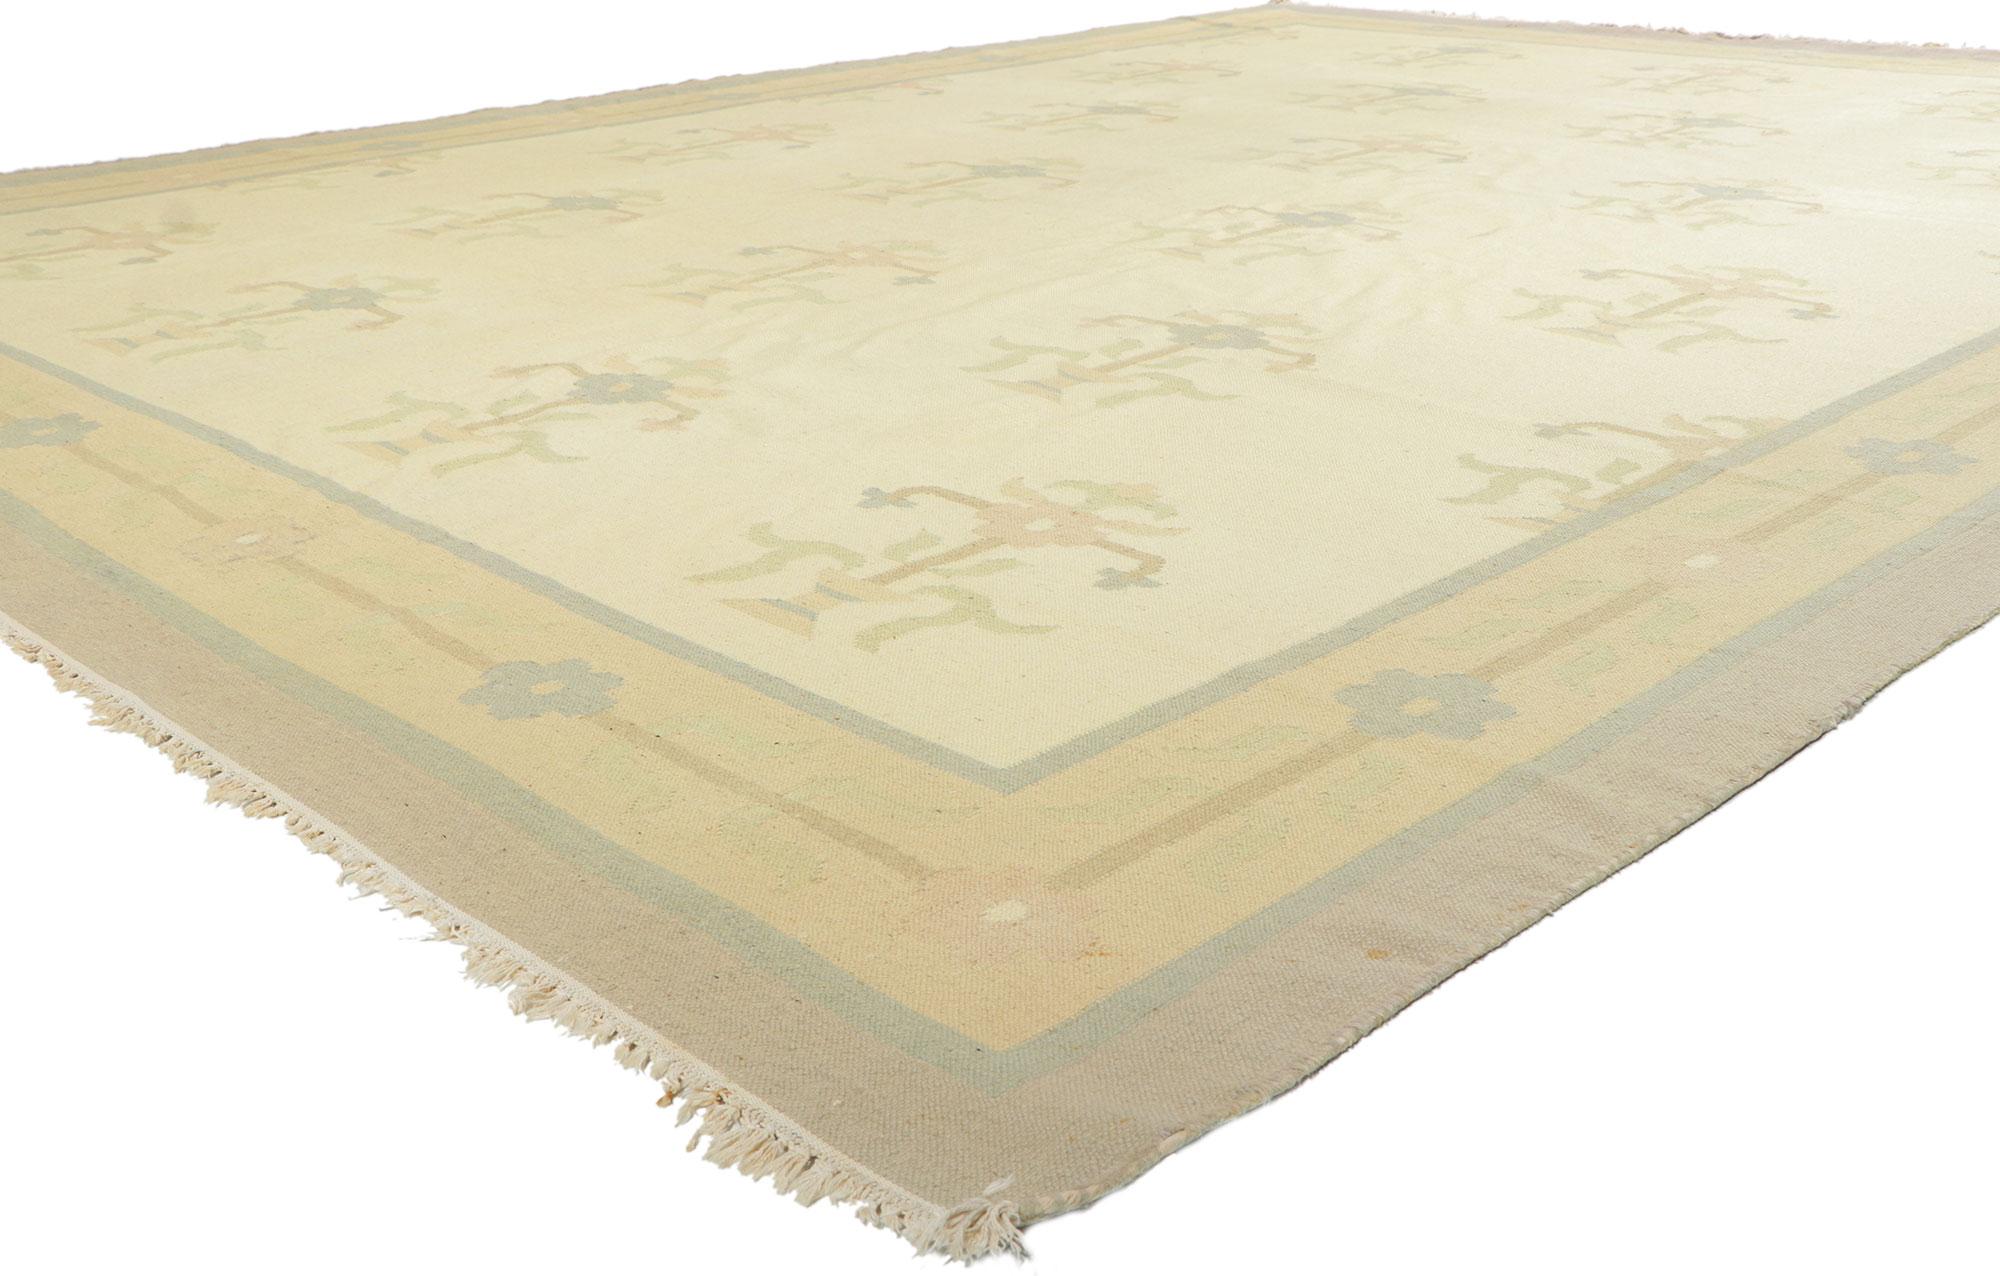 78357 Vintage Floral Indian Dhurrie rug, 10'03 x 13'08. With its subdued ornamentation, incredible detail and texture, this handwoven wool vintage Indian floral Dhurrie rug is a captivating vision of woven beauty. The timeless floral design and soft